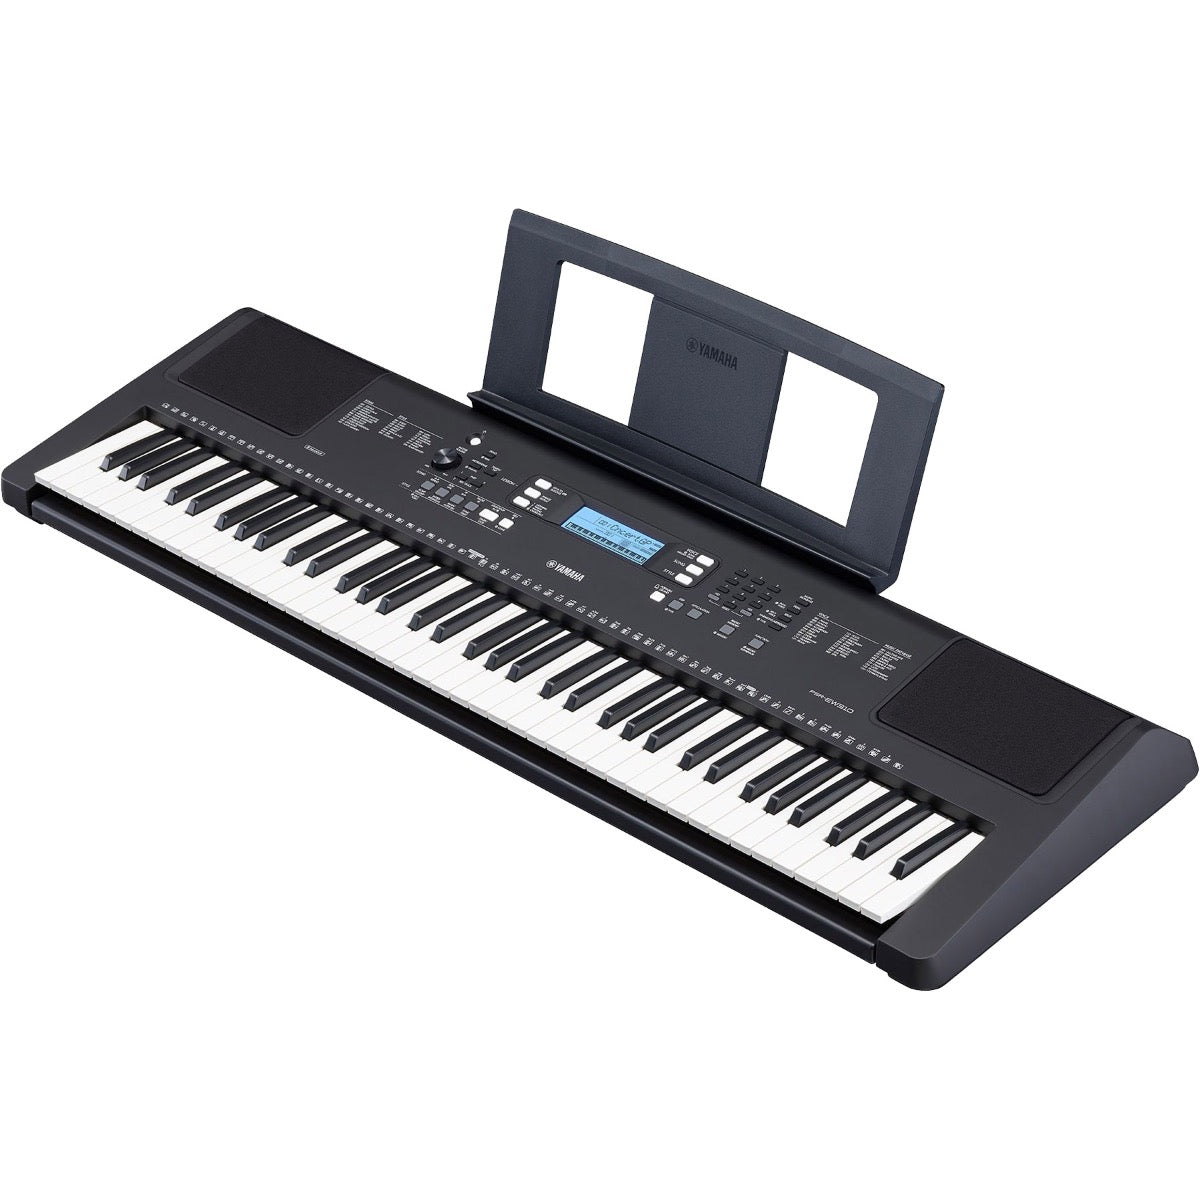 3/4 view of Yamaha PSR-EW310 Portable Keyboard with music rest installed showing top, front and right side